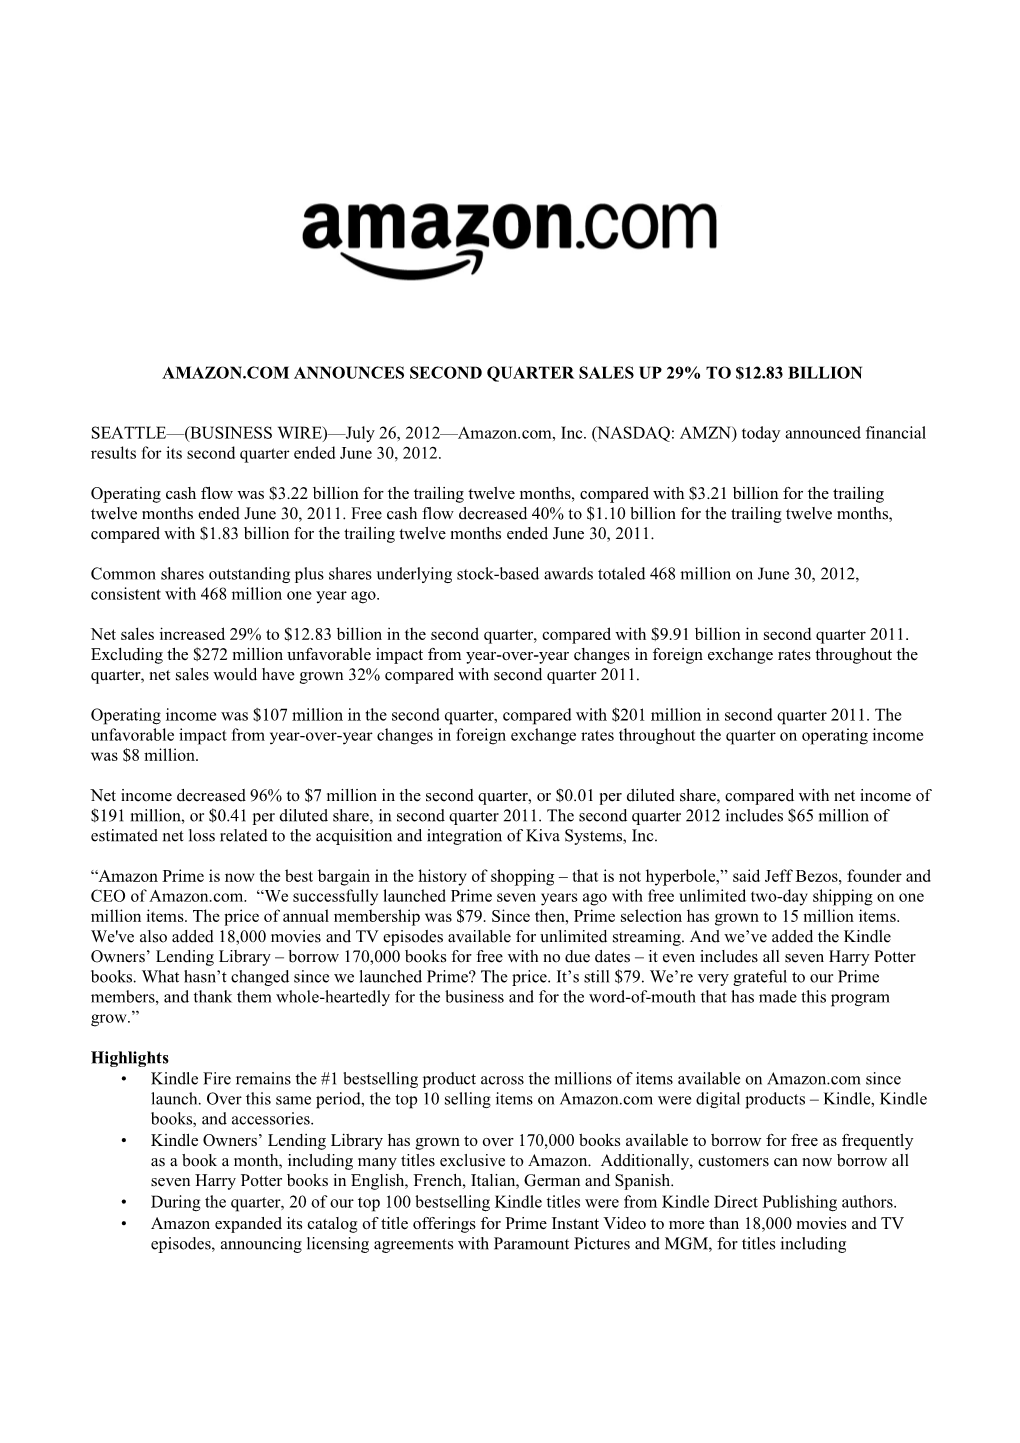 July 26, 2012—Amazon.Com, Inc. (NASDAQ: AMZN) Today Announced Financial Results for Its Second Quarter Ended June 30, 2012